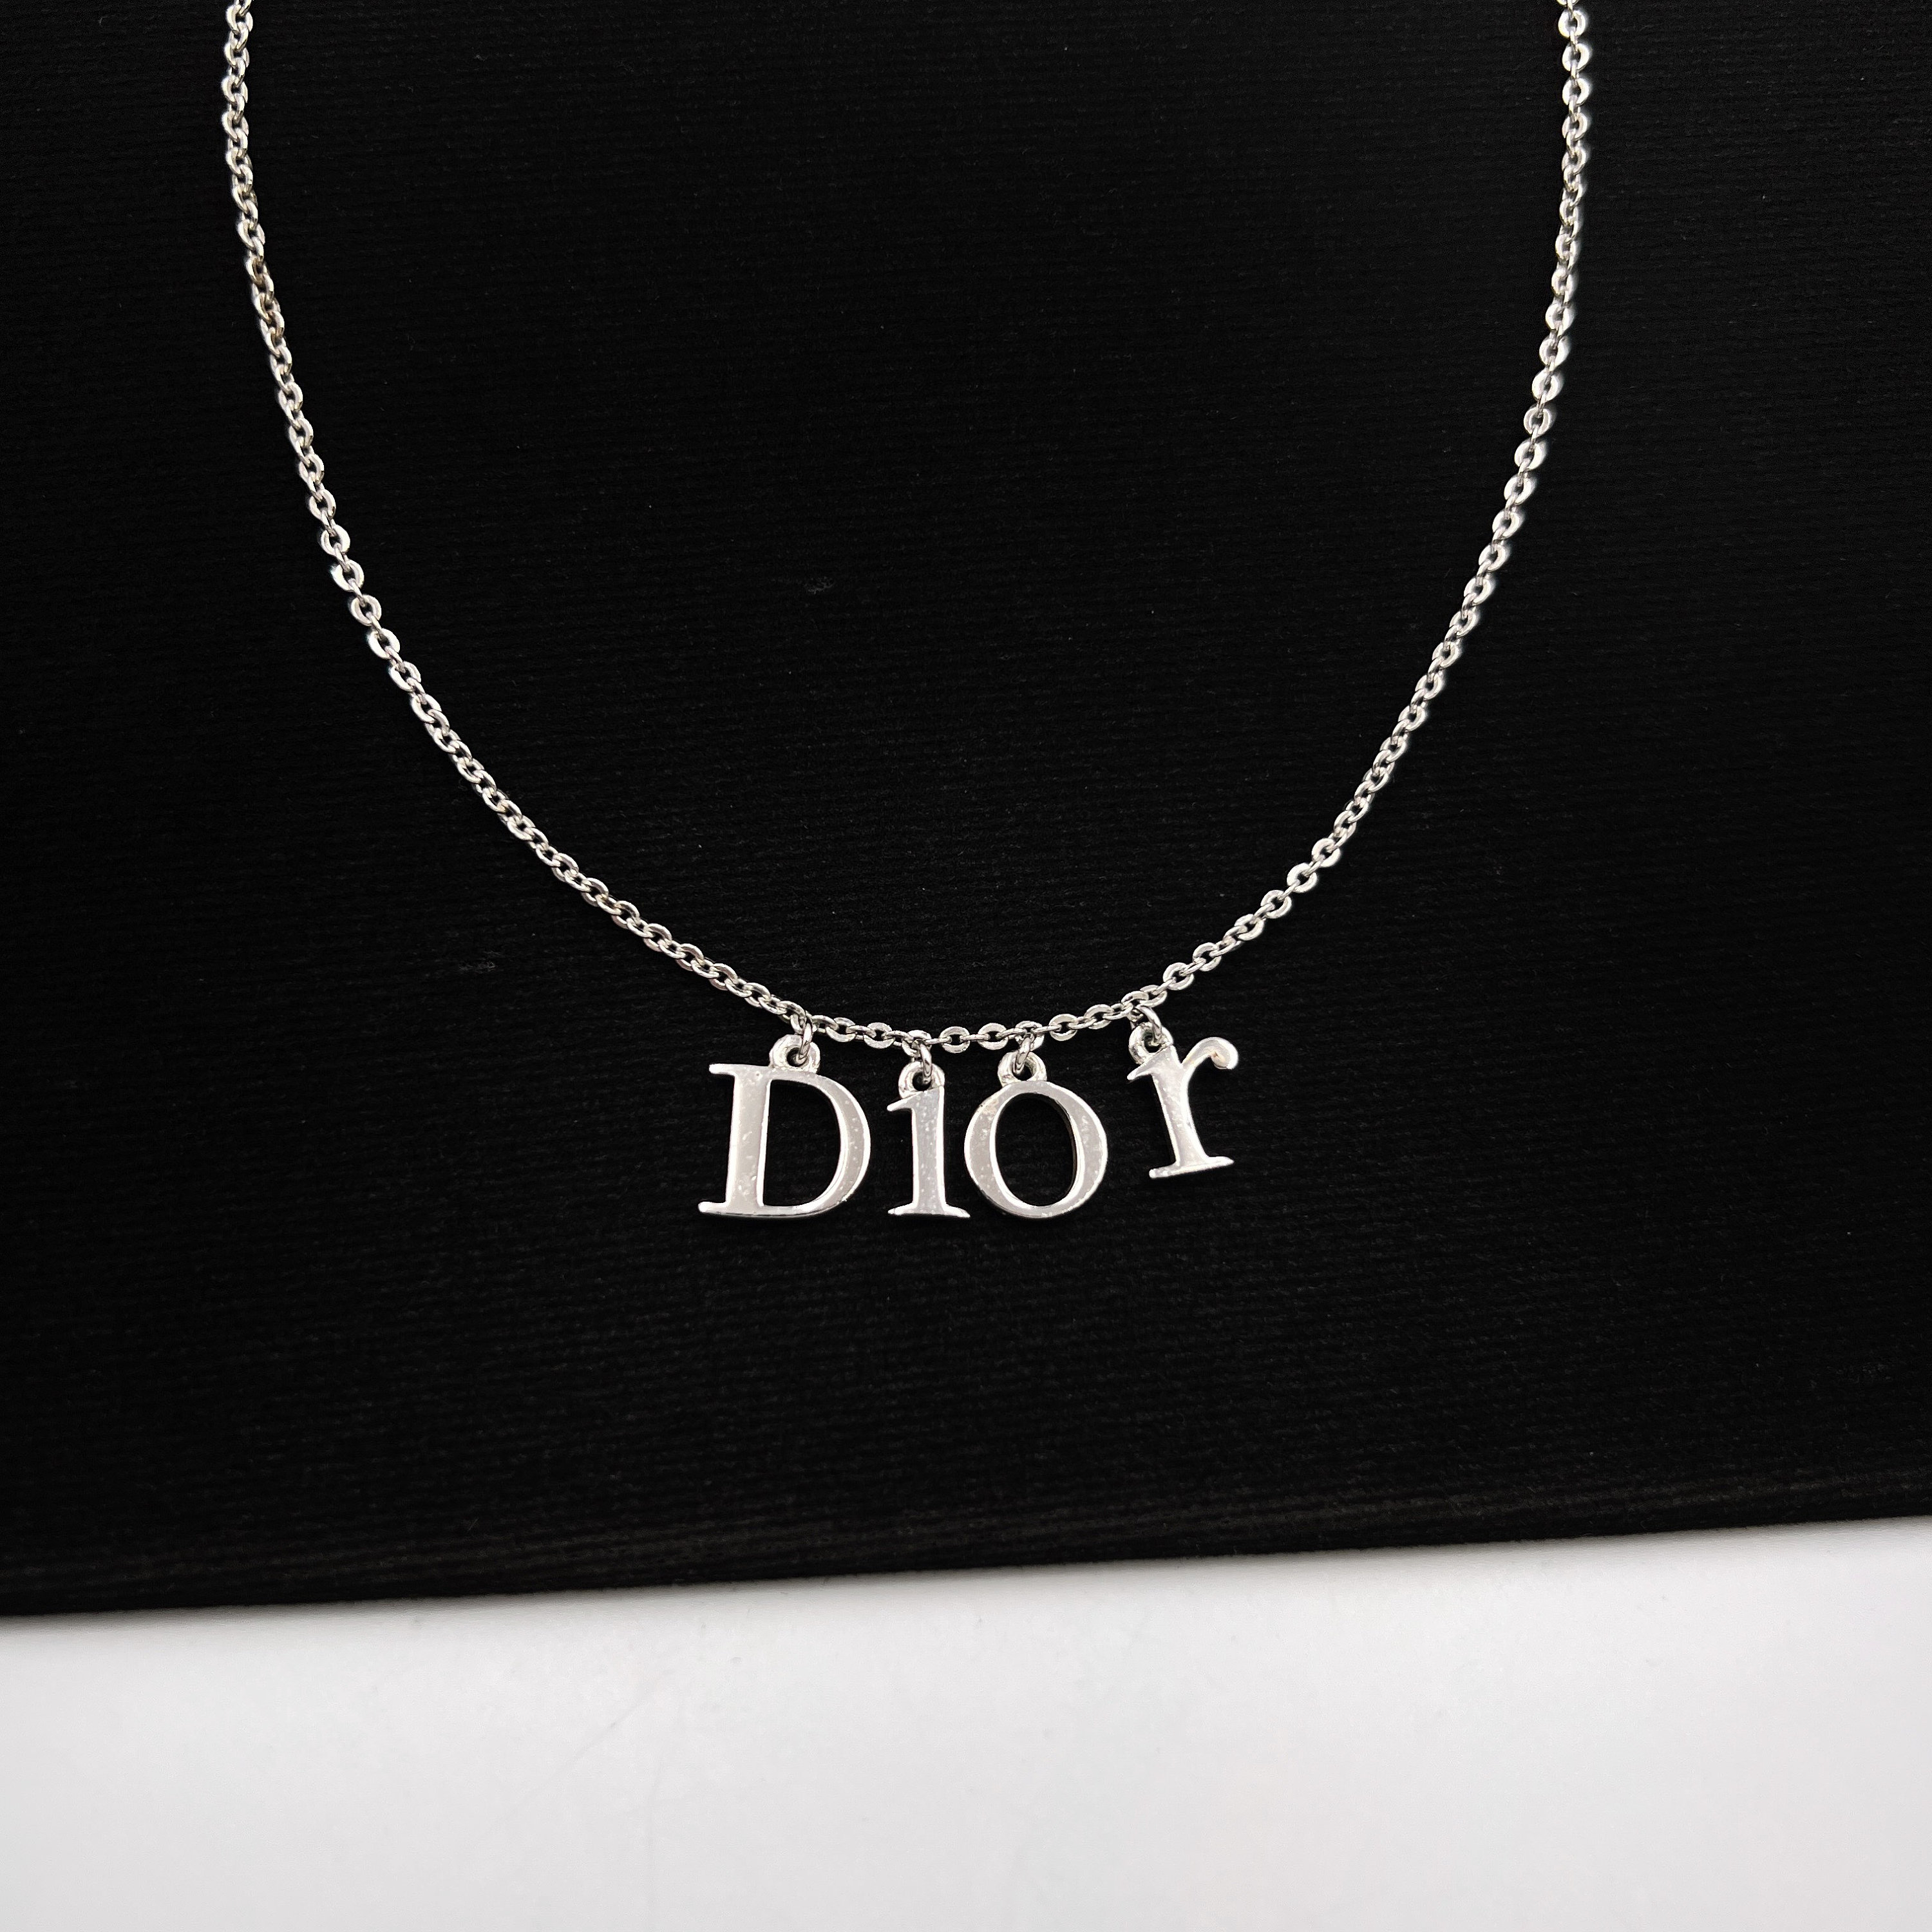 Authentic Christian Dior Black Charm Necklace Clover Heart GP Jewelry  Accessory